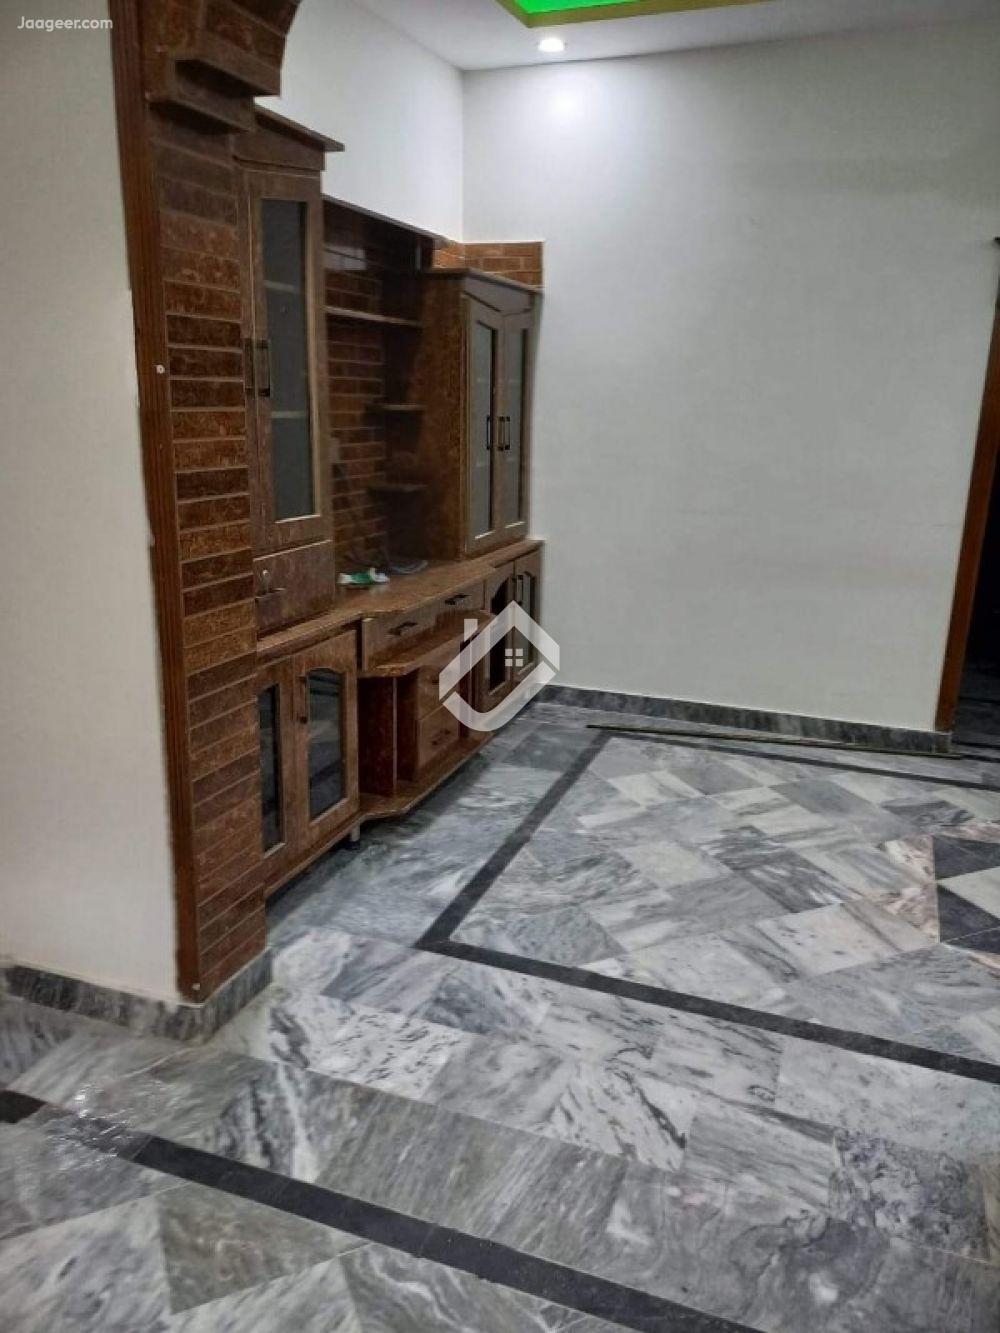 View  4 Marla Double Storey House For Rent In Ghauri Town  in Ghauri Town, Islamabad